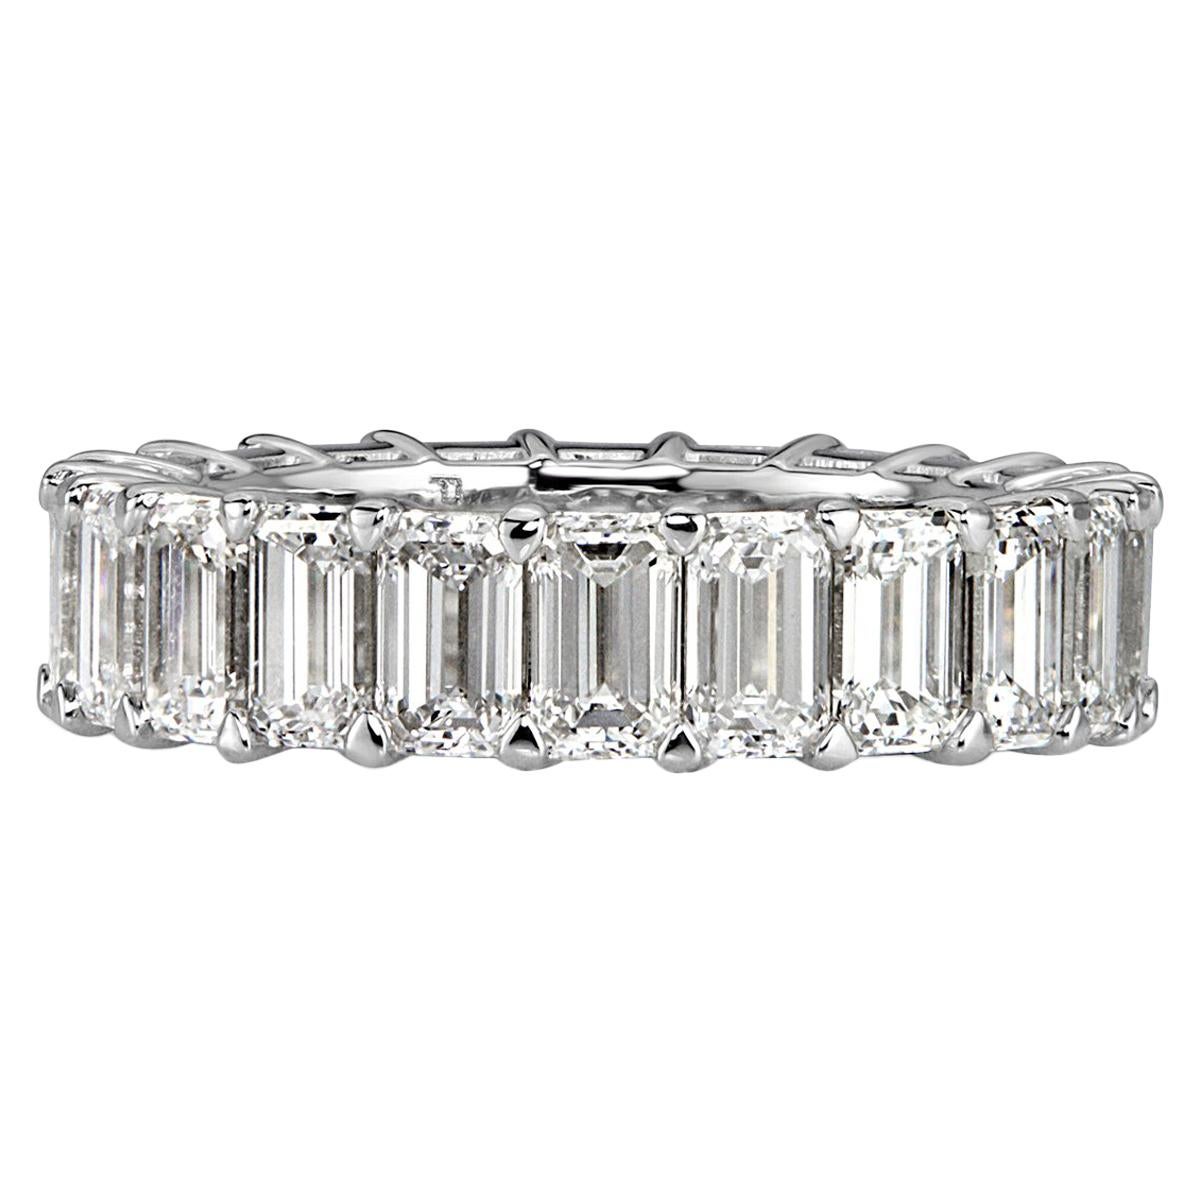 Mark Broumand 6.69 Carat Emerald Cut Diamond Eternity Band in 18k White Gold For Sale